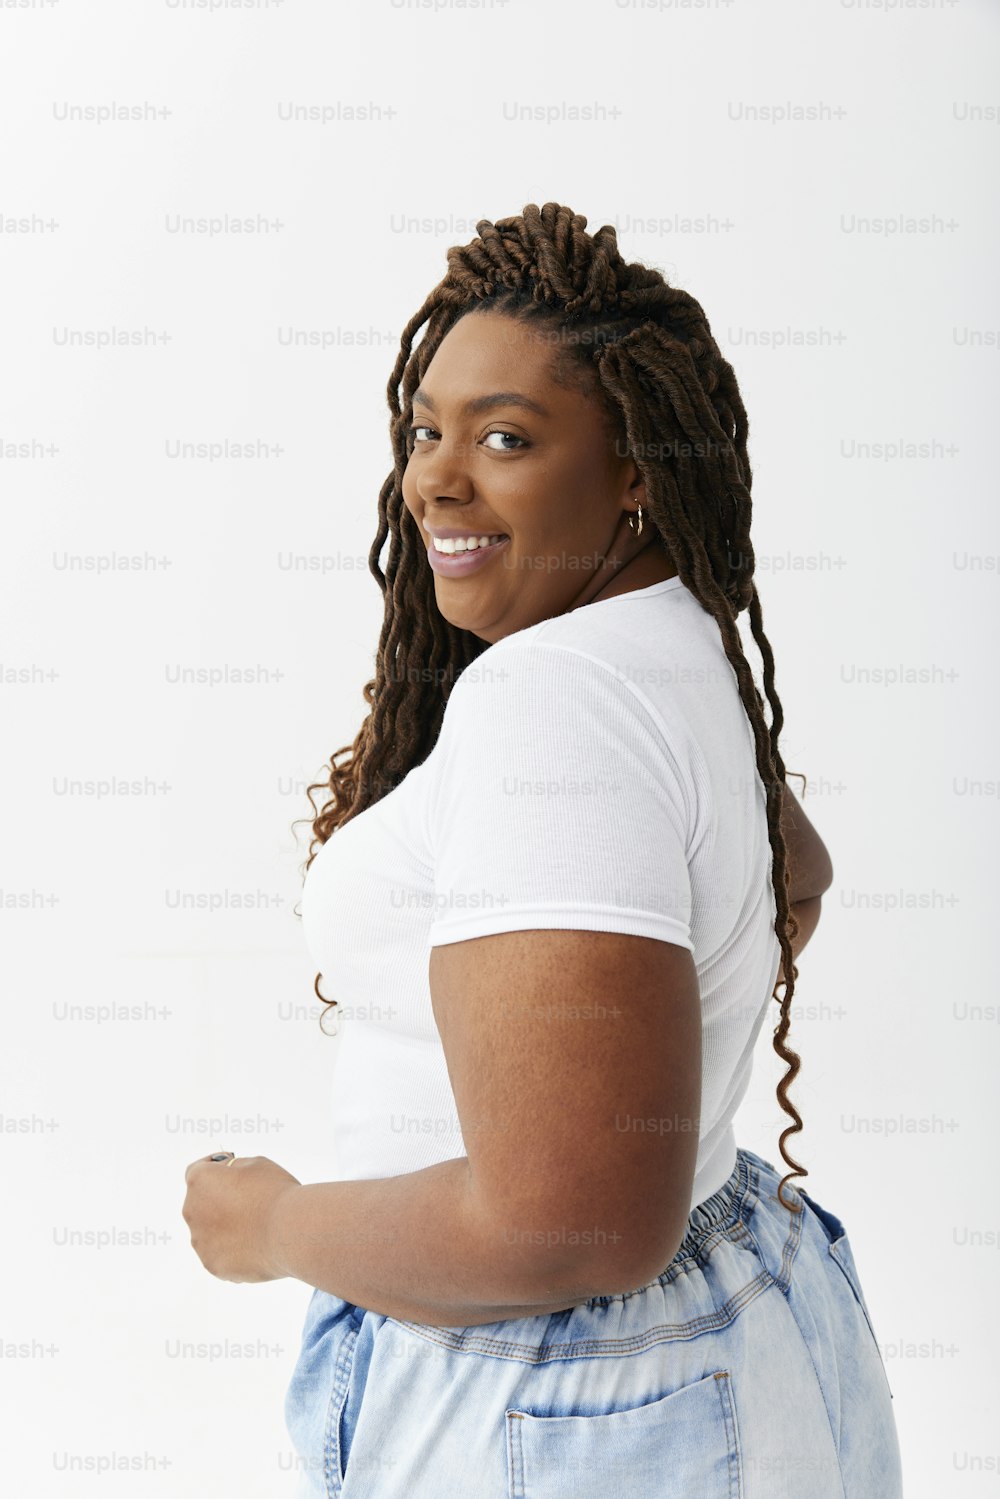 a woman with dreadlocks and a white t - shirt